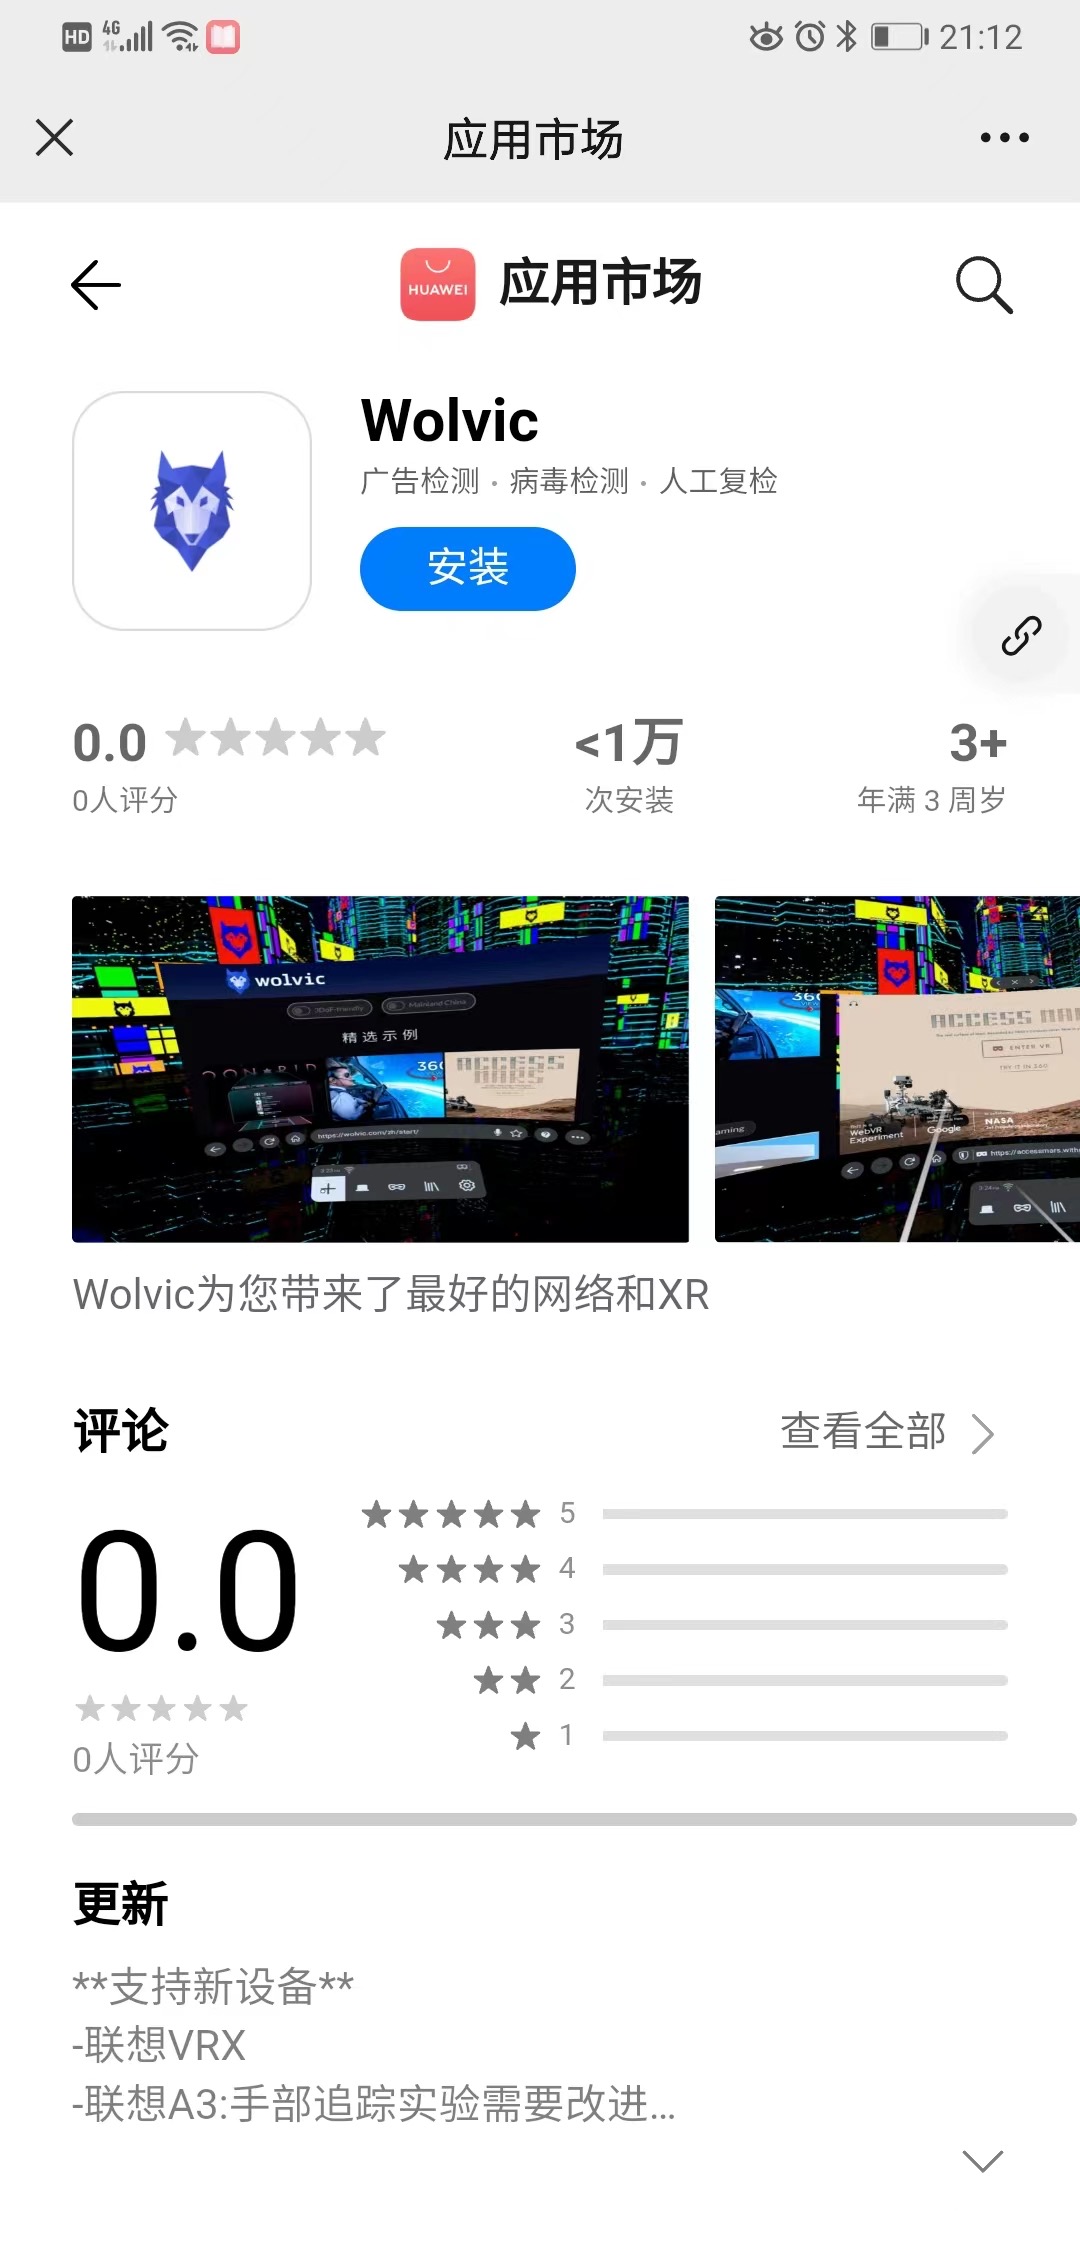 Wolvic in the Huawei App Gallery